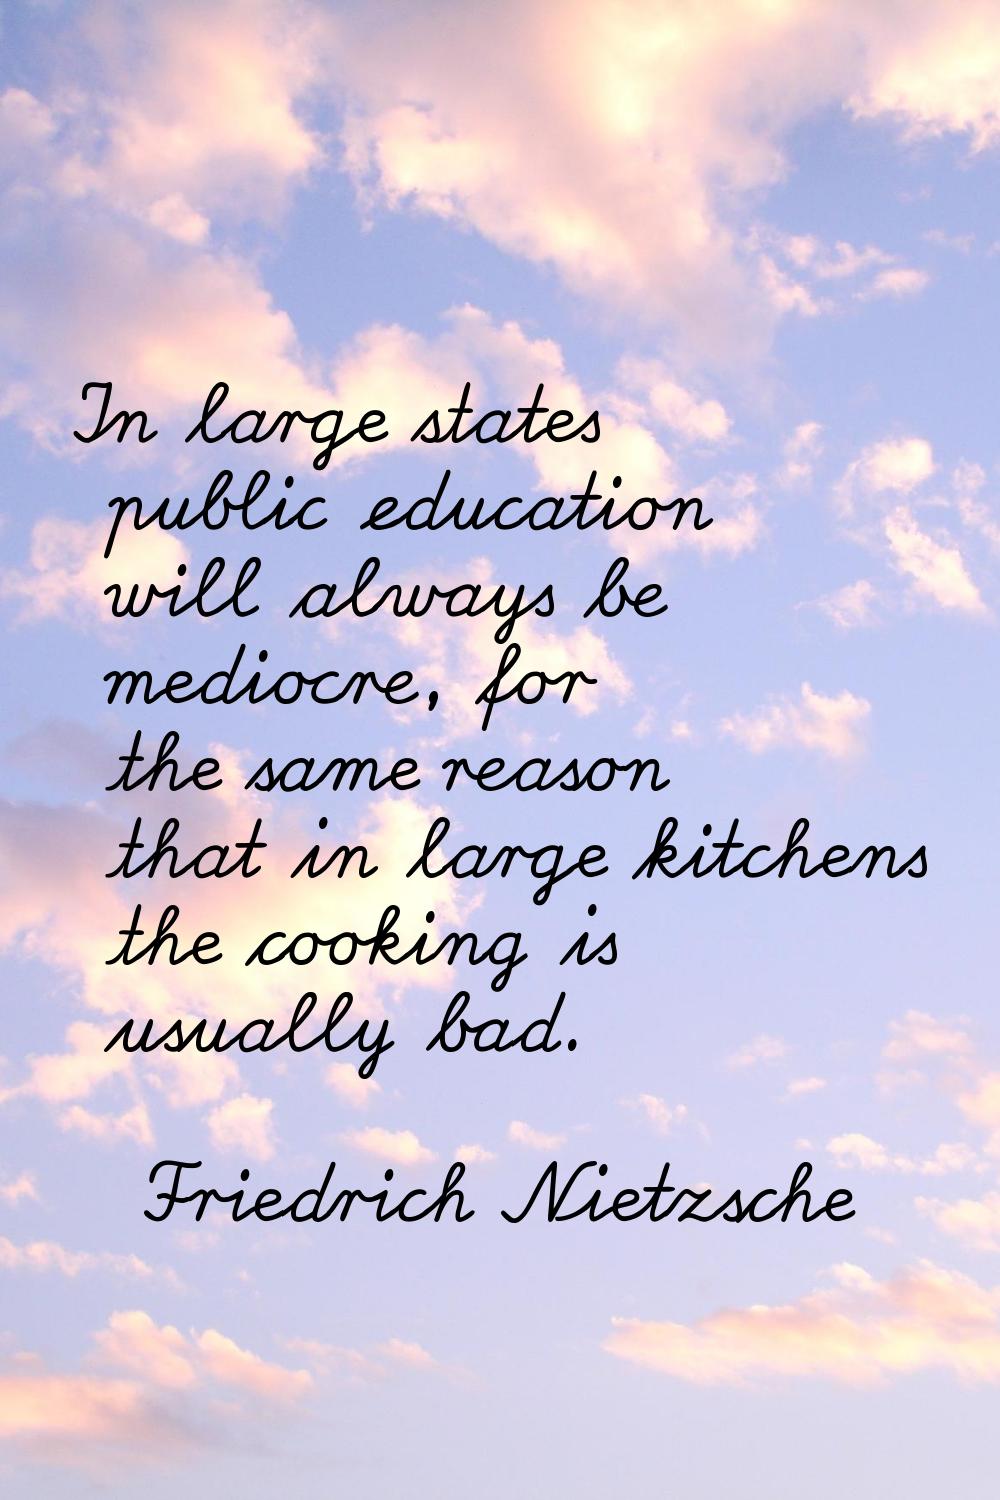 In large states public education will always be mediocre, for the same reason that in large kitchen